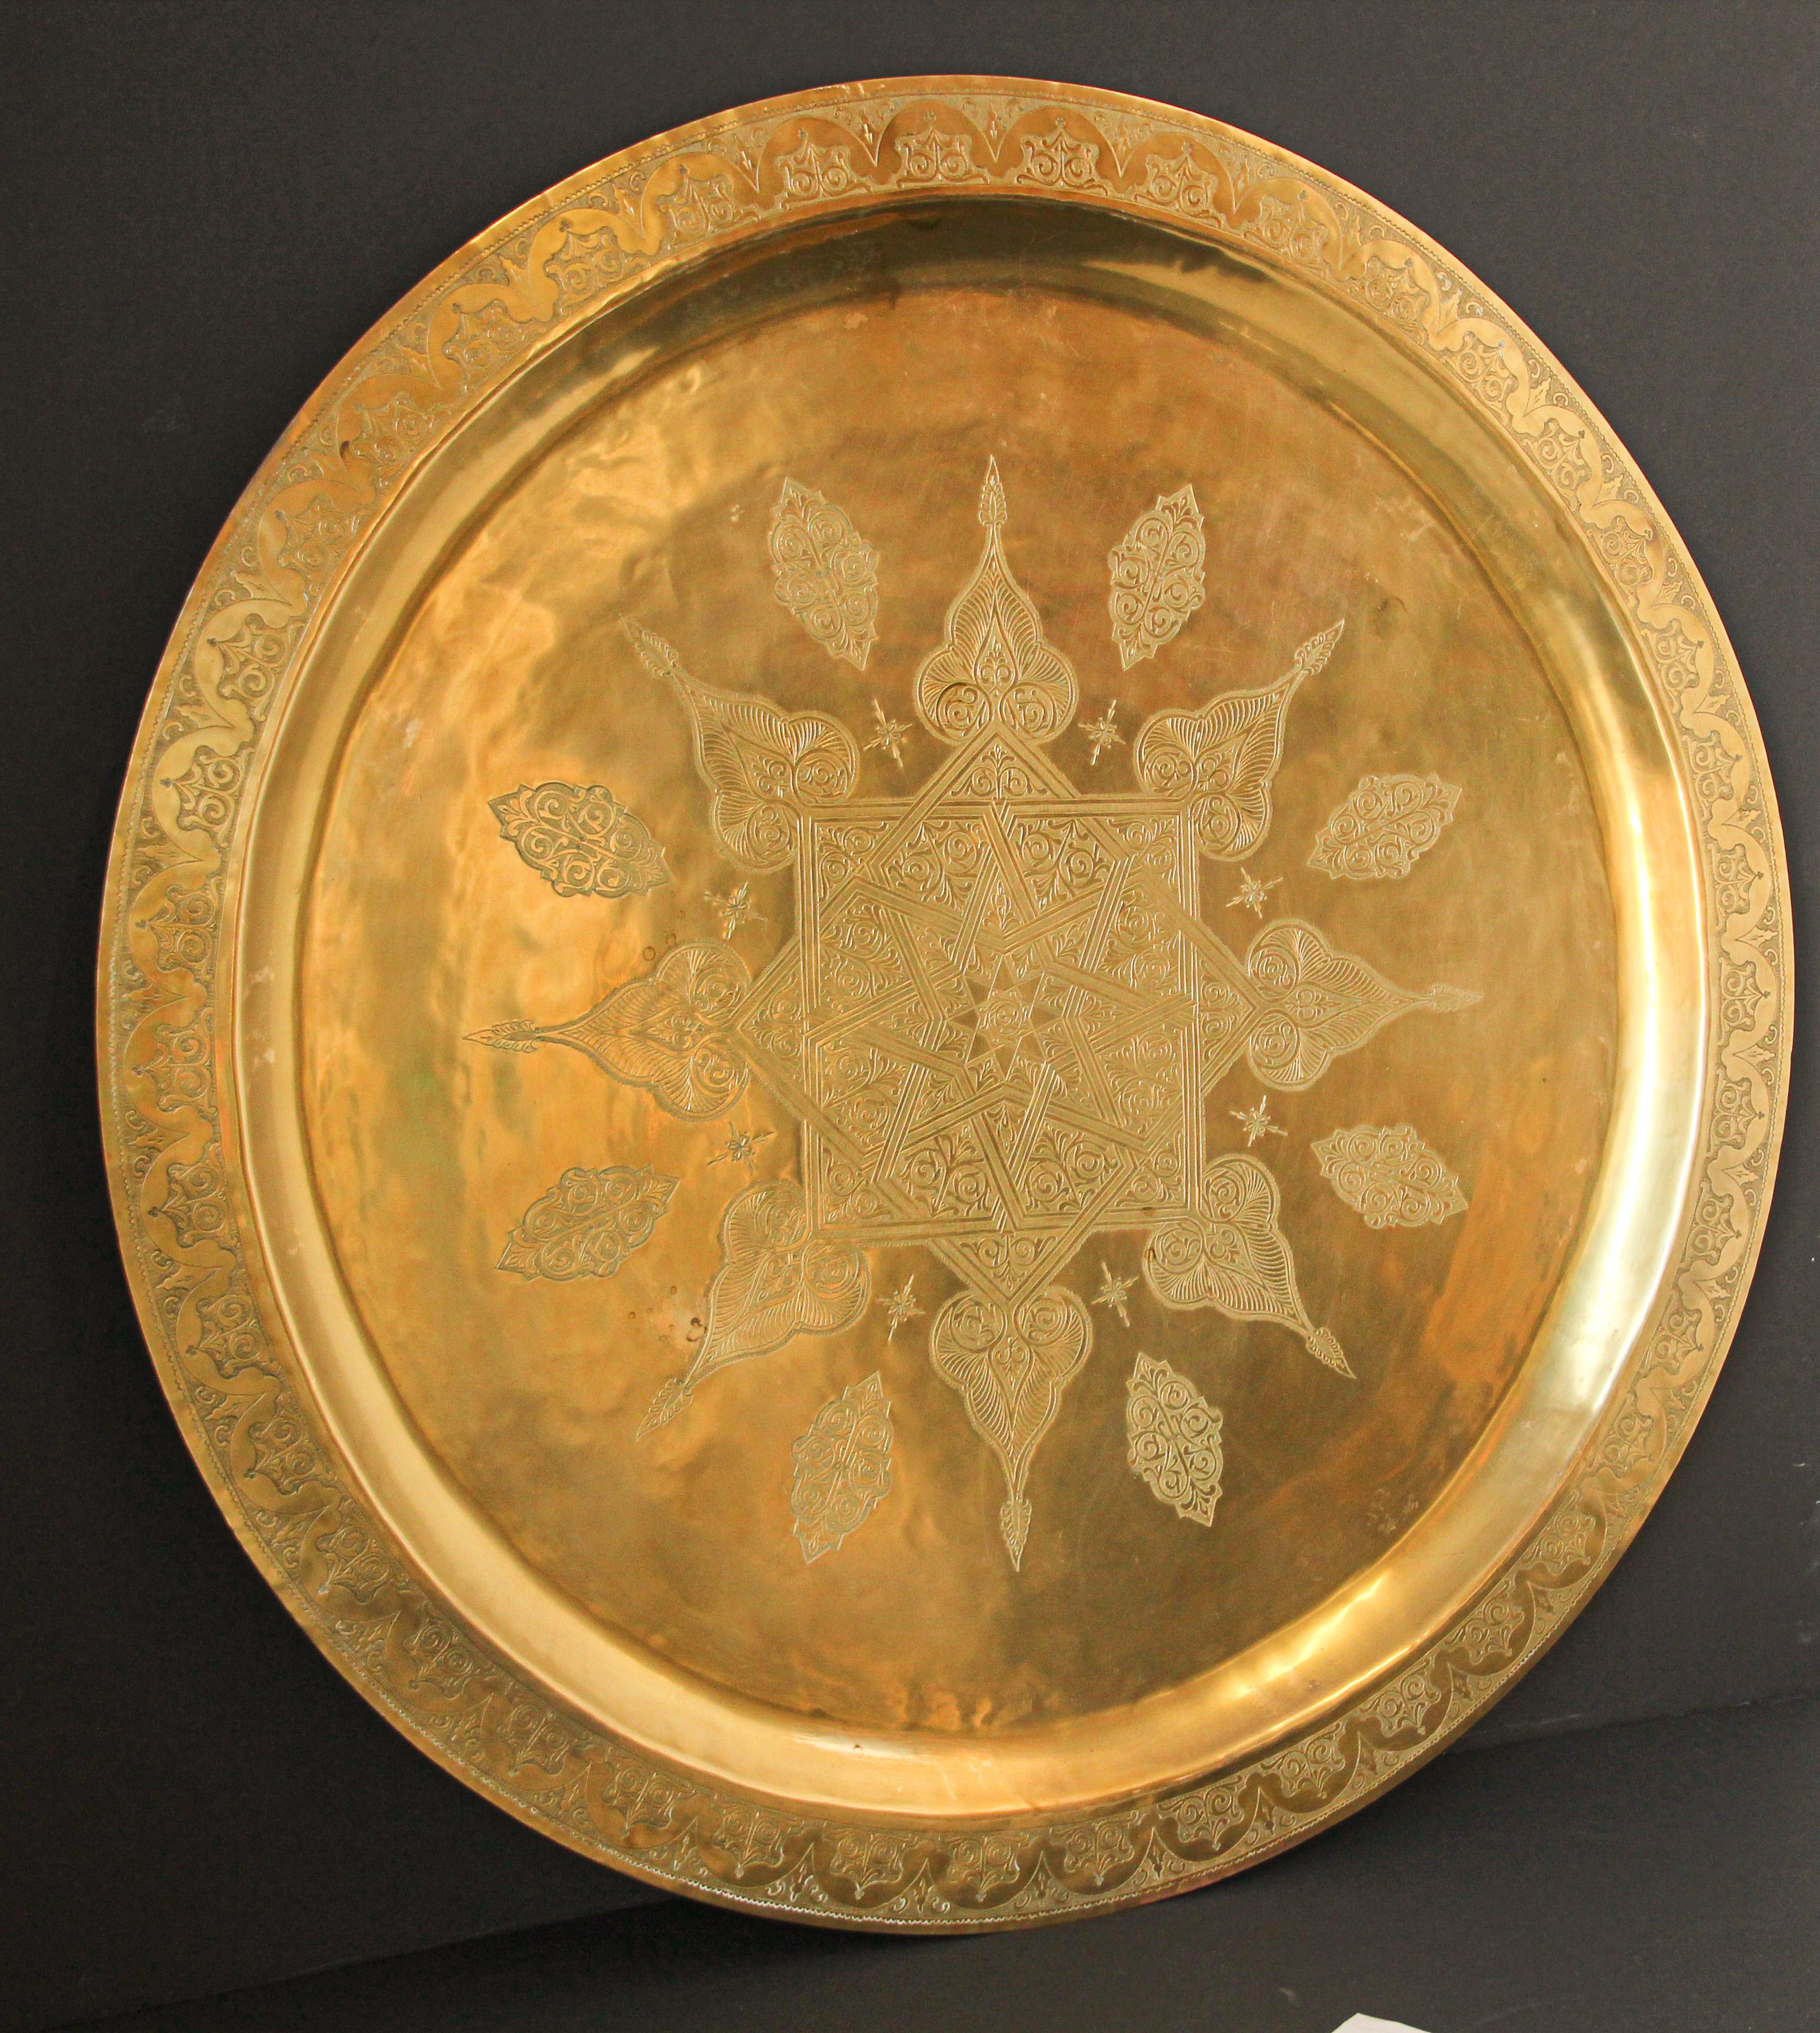 Monumental Moroccan metal brass tray platter.
Polished decorative metal brass tray with very fine intricate designs.
Finley hand-hammered and chiseled in floral and geometrical Moorish designs with a star in the middle.
Heavy brass metal brass tray